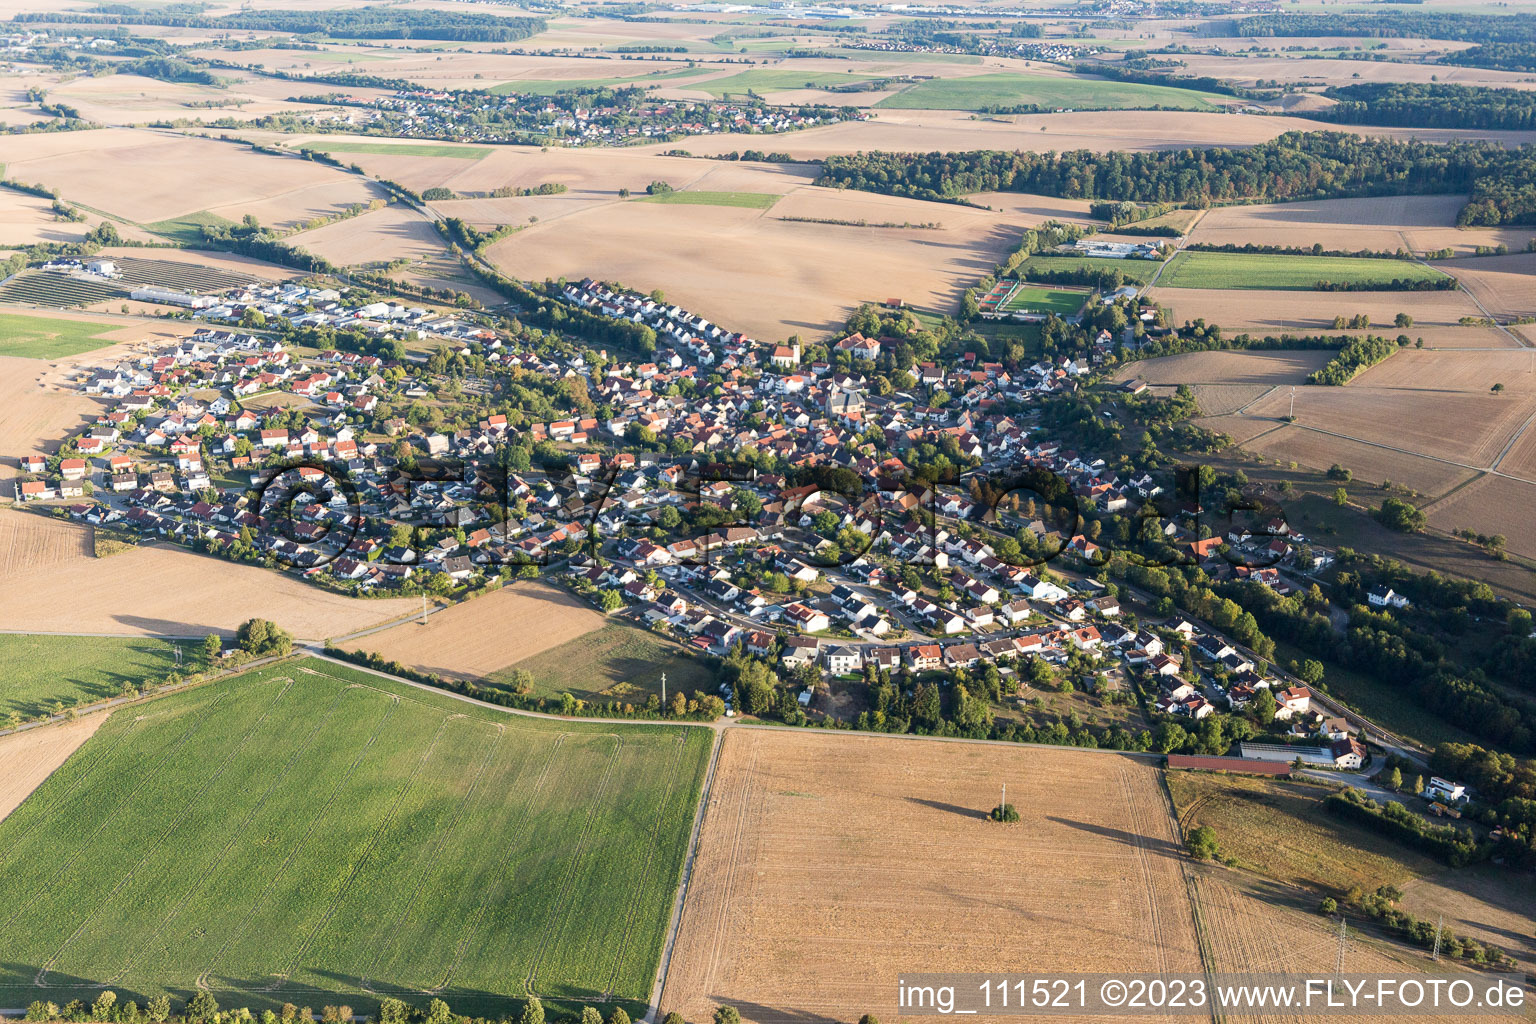 Obergimpern in the state Baden-Wuerttemberg, Germany from above